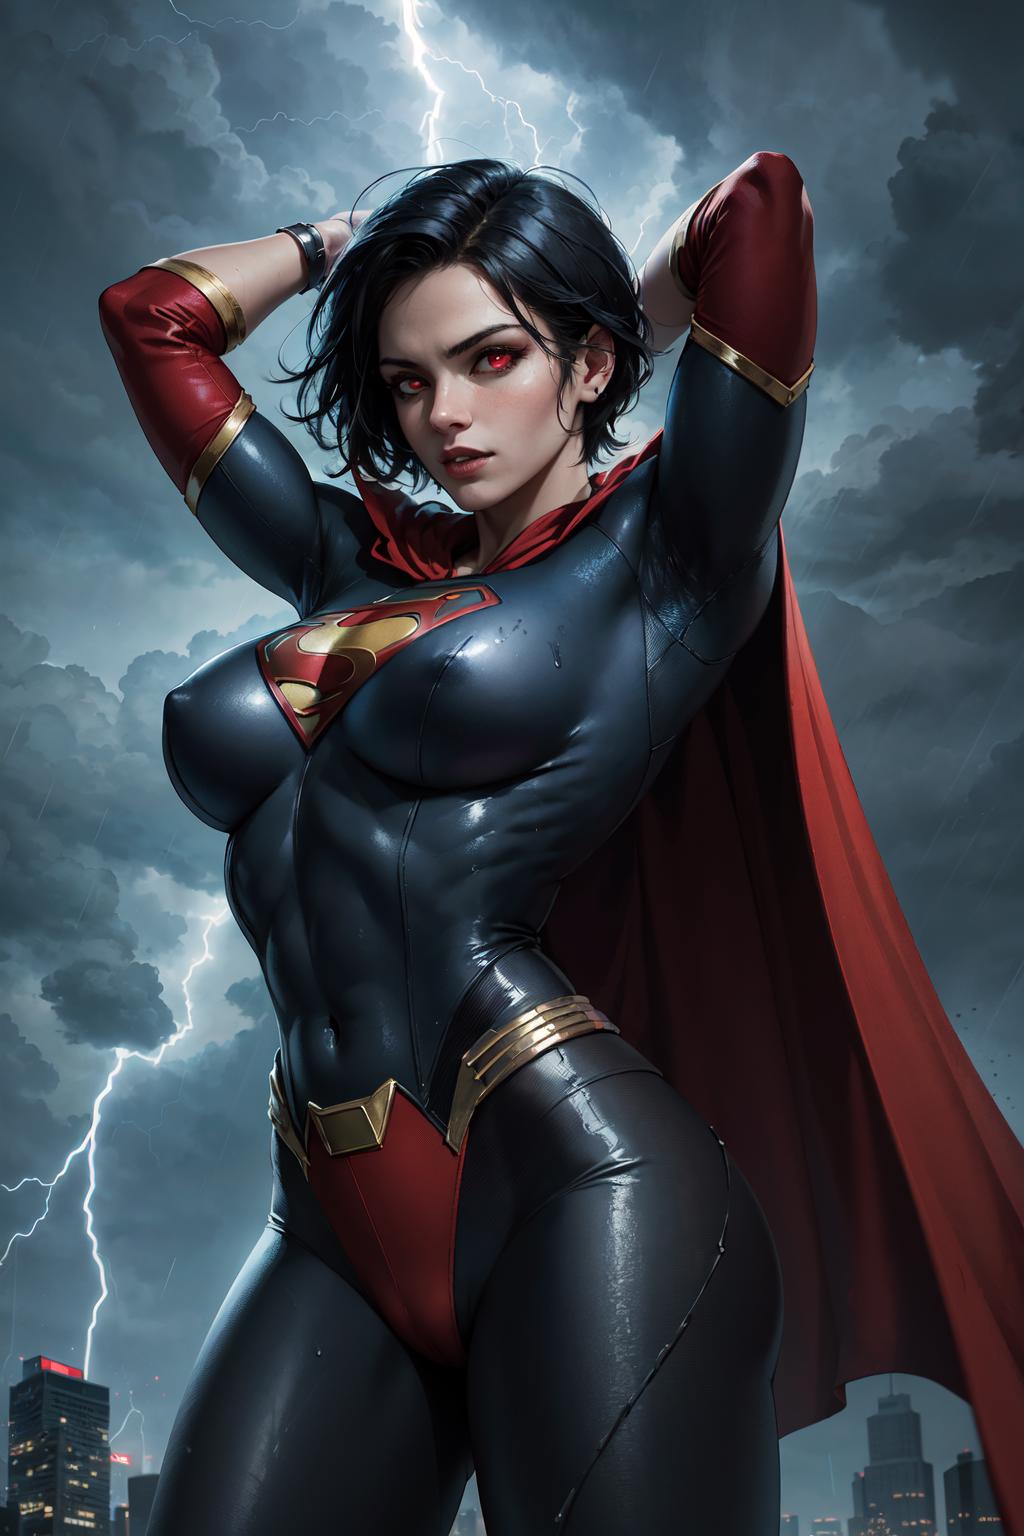 Superwoman posing in a black and red costume with cape and red hair.